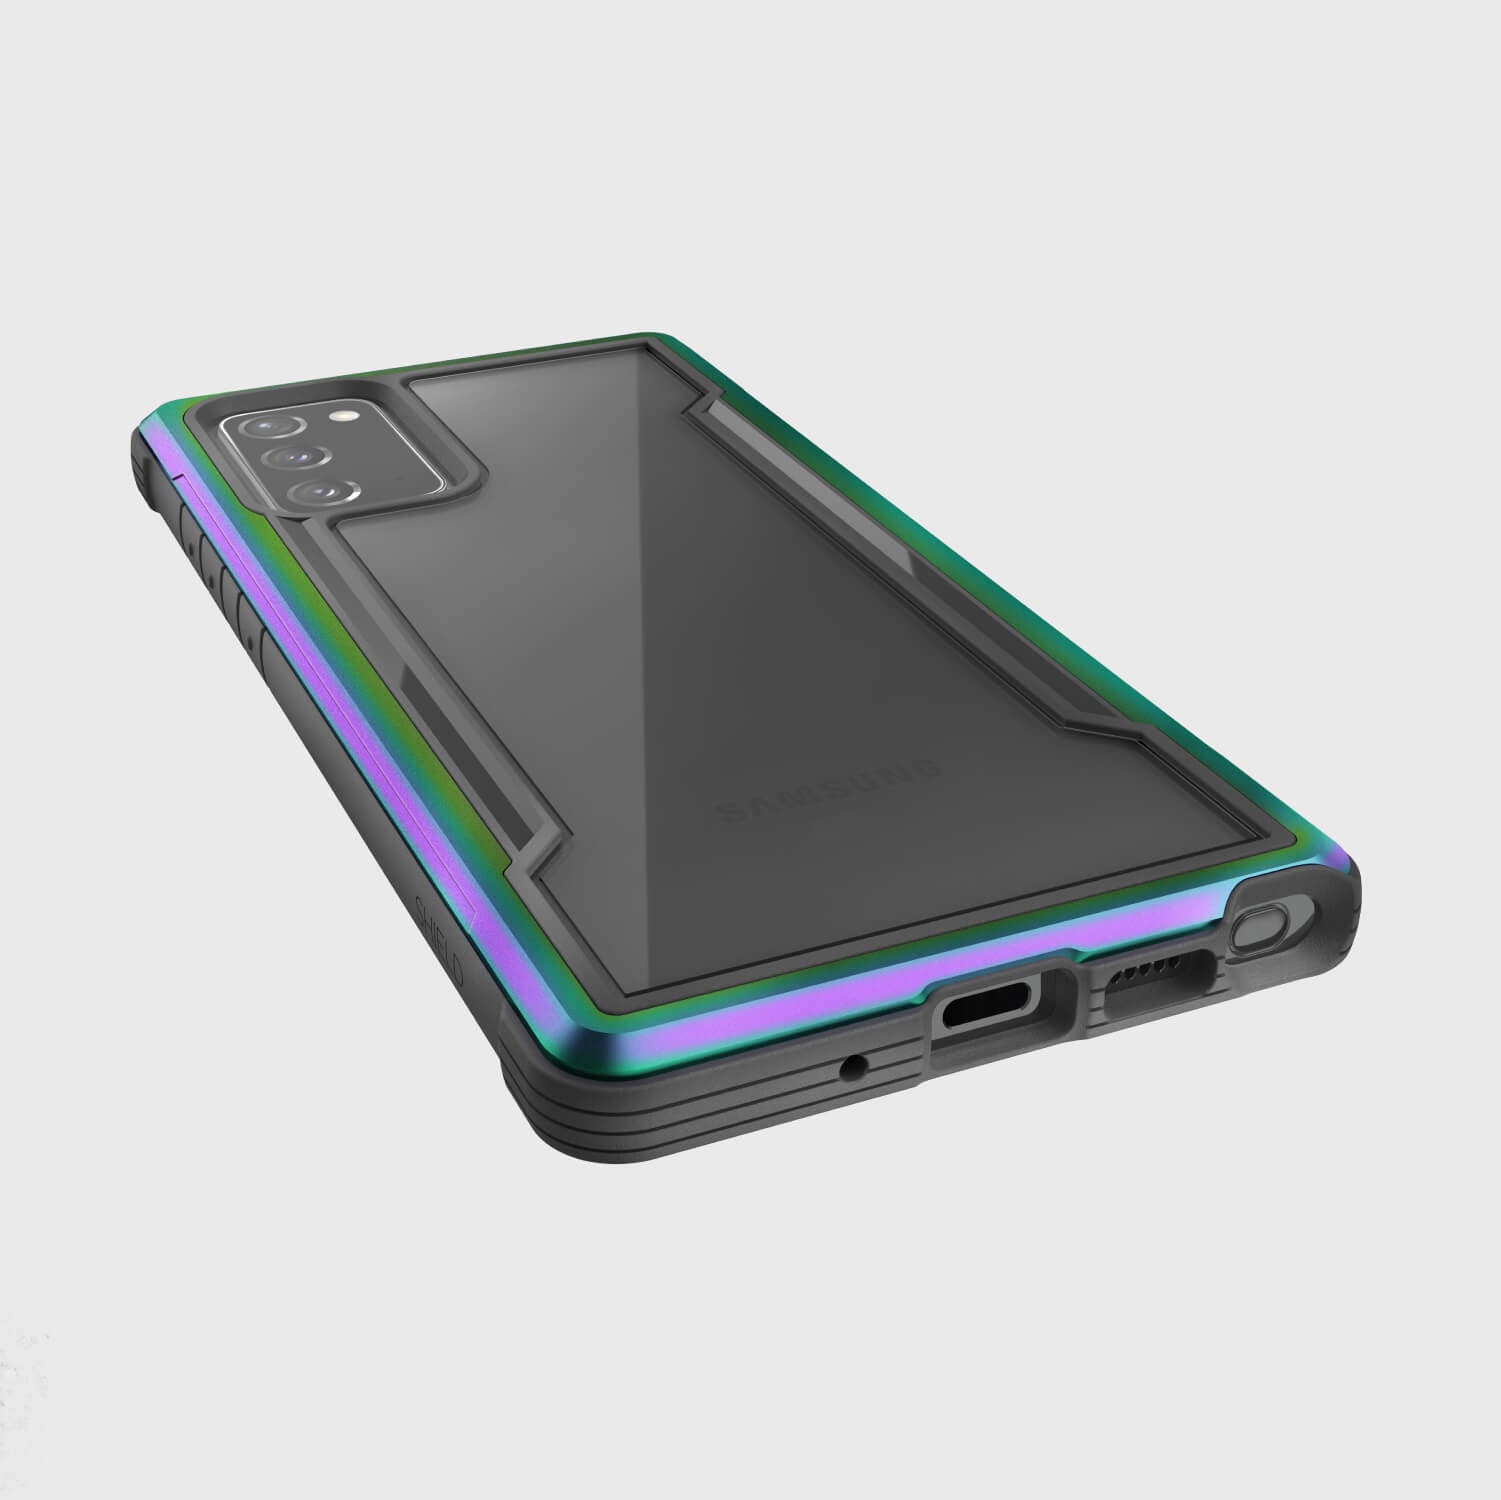 The back view of the Raptic Samsung Galaxy Note 20 Case - SHIELD Iridescent, offering drop protection and wireless charging compatibility.